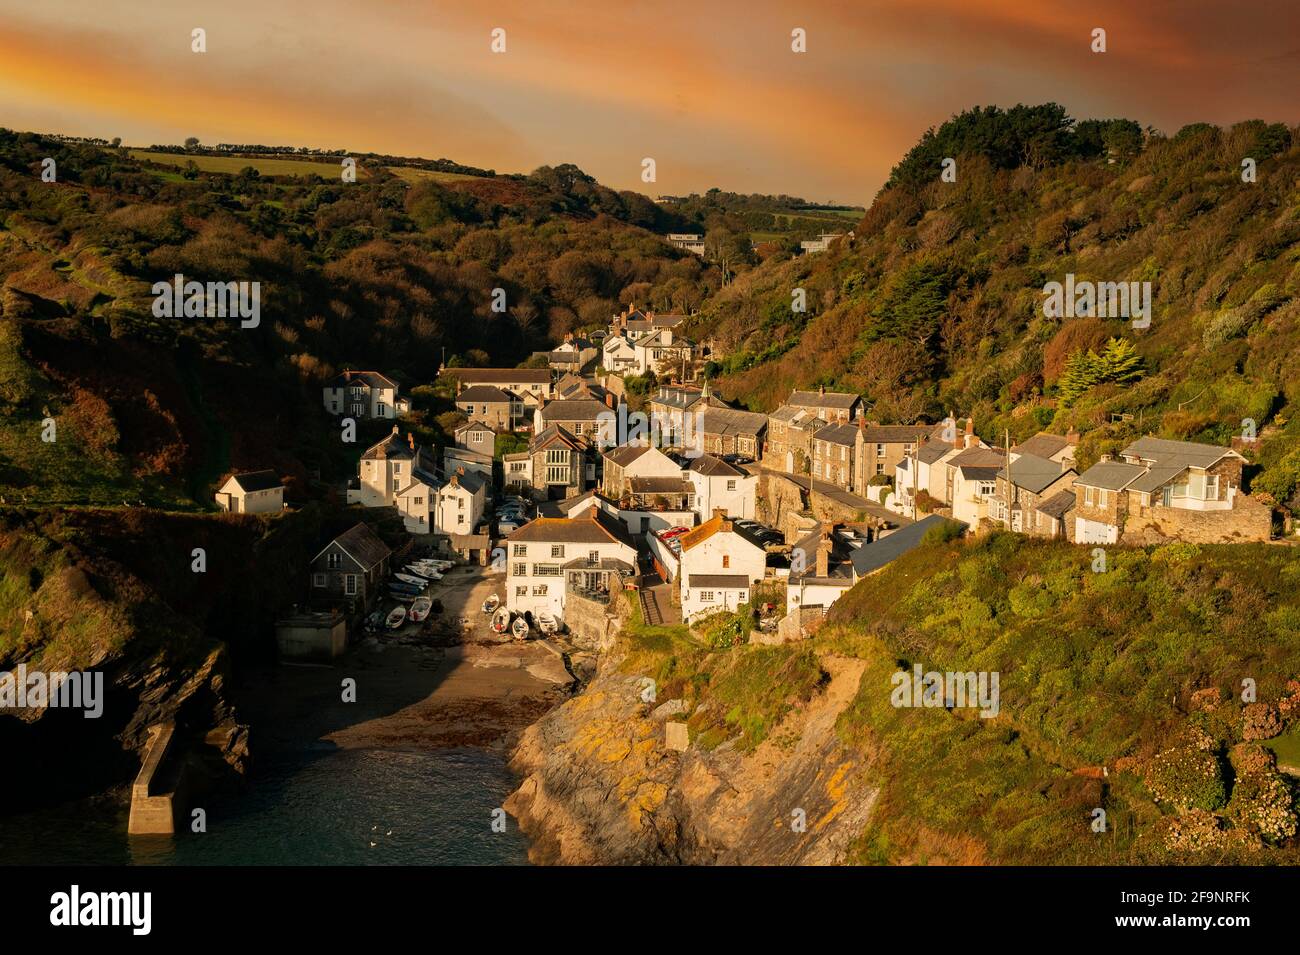 Sunset at the cornish village of portloe in cornwall england Stock Photo